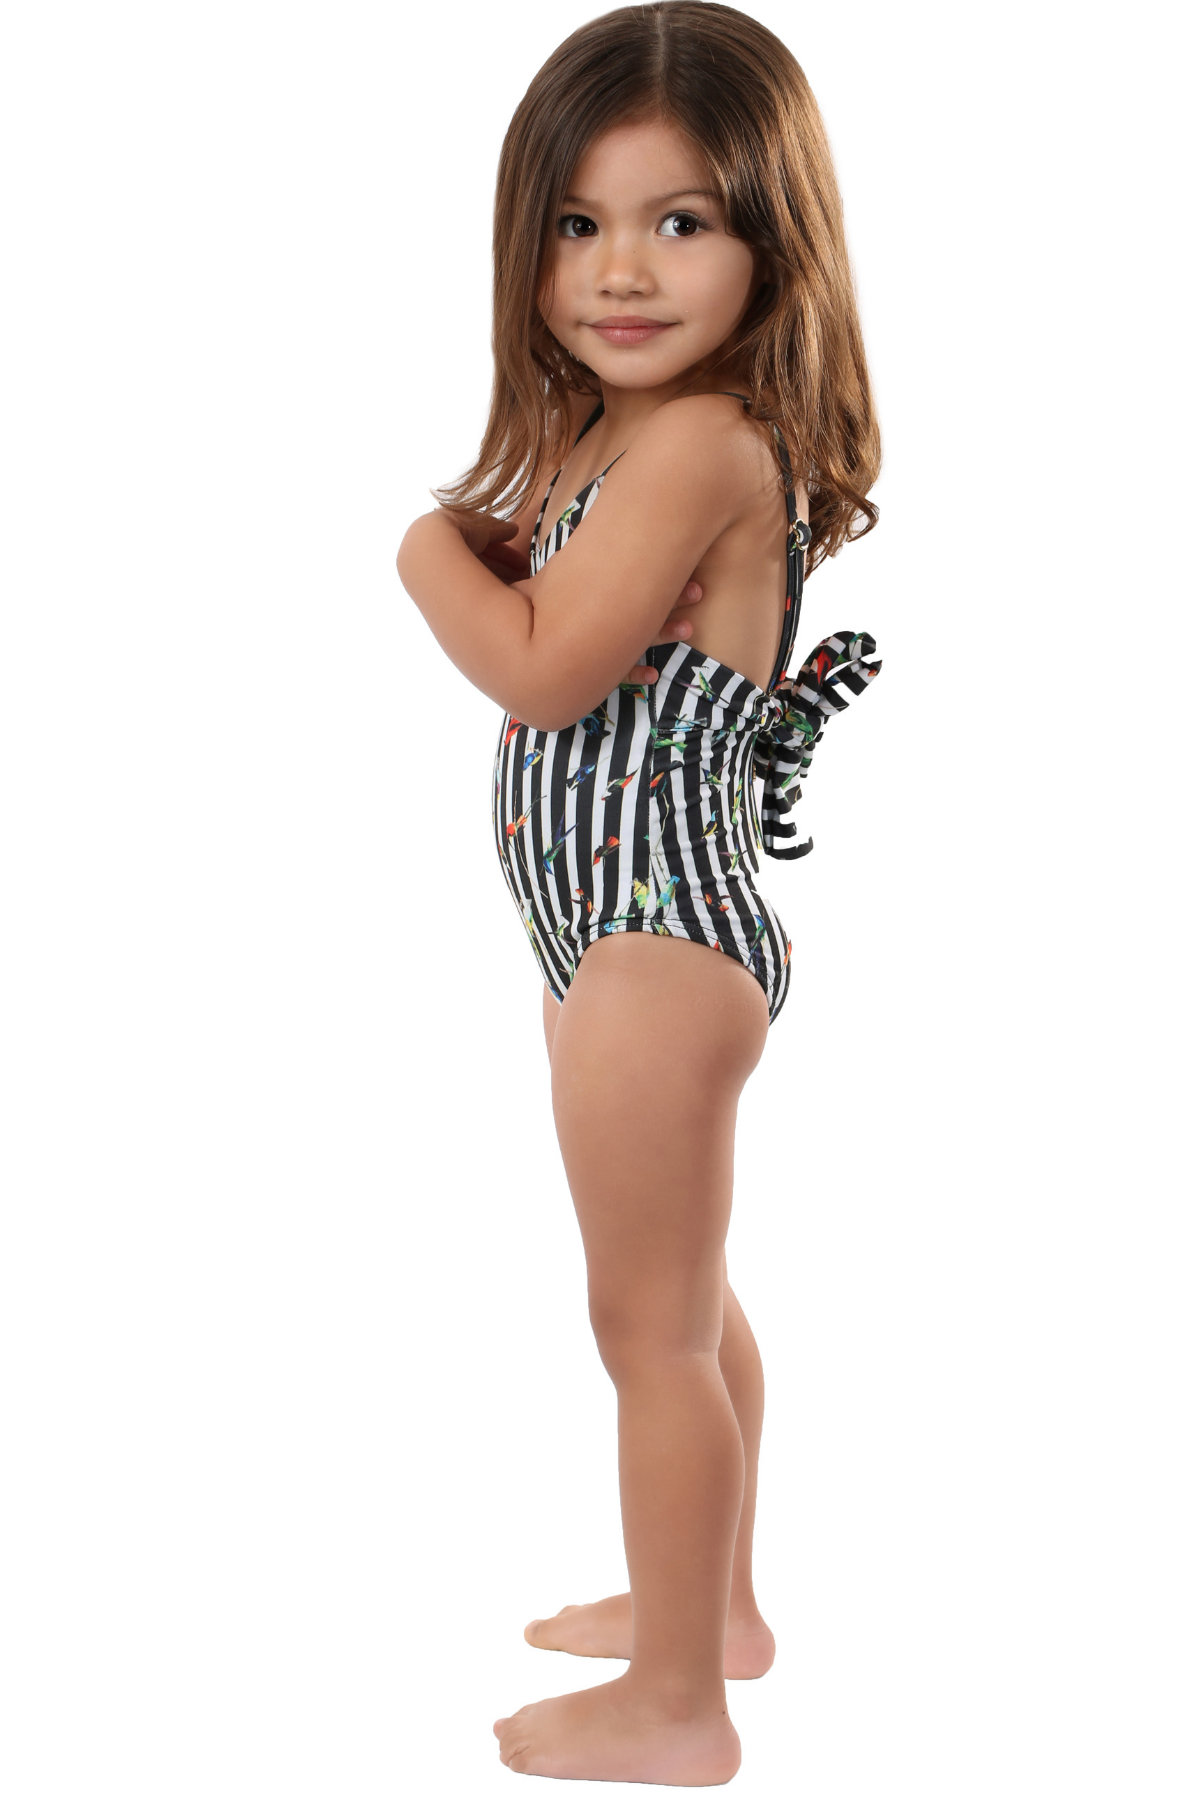 Kids One Piece Swimsuit. Ties in the Back